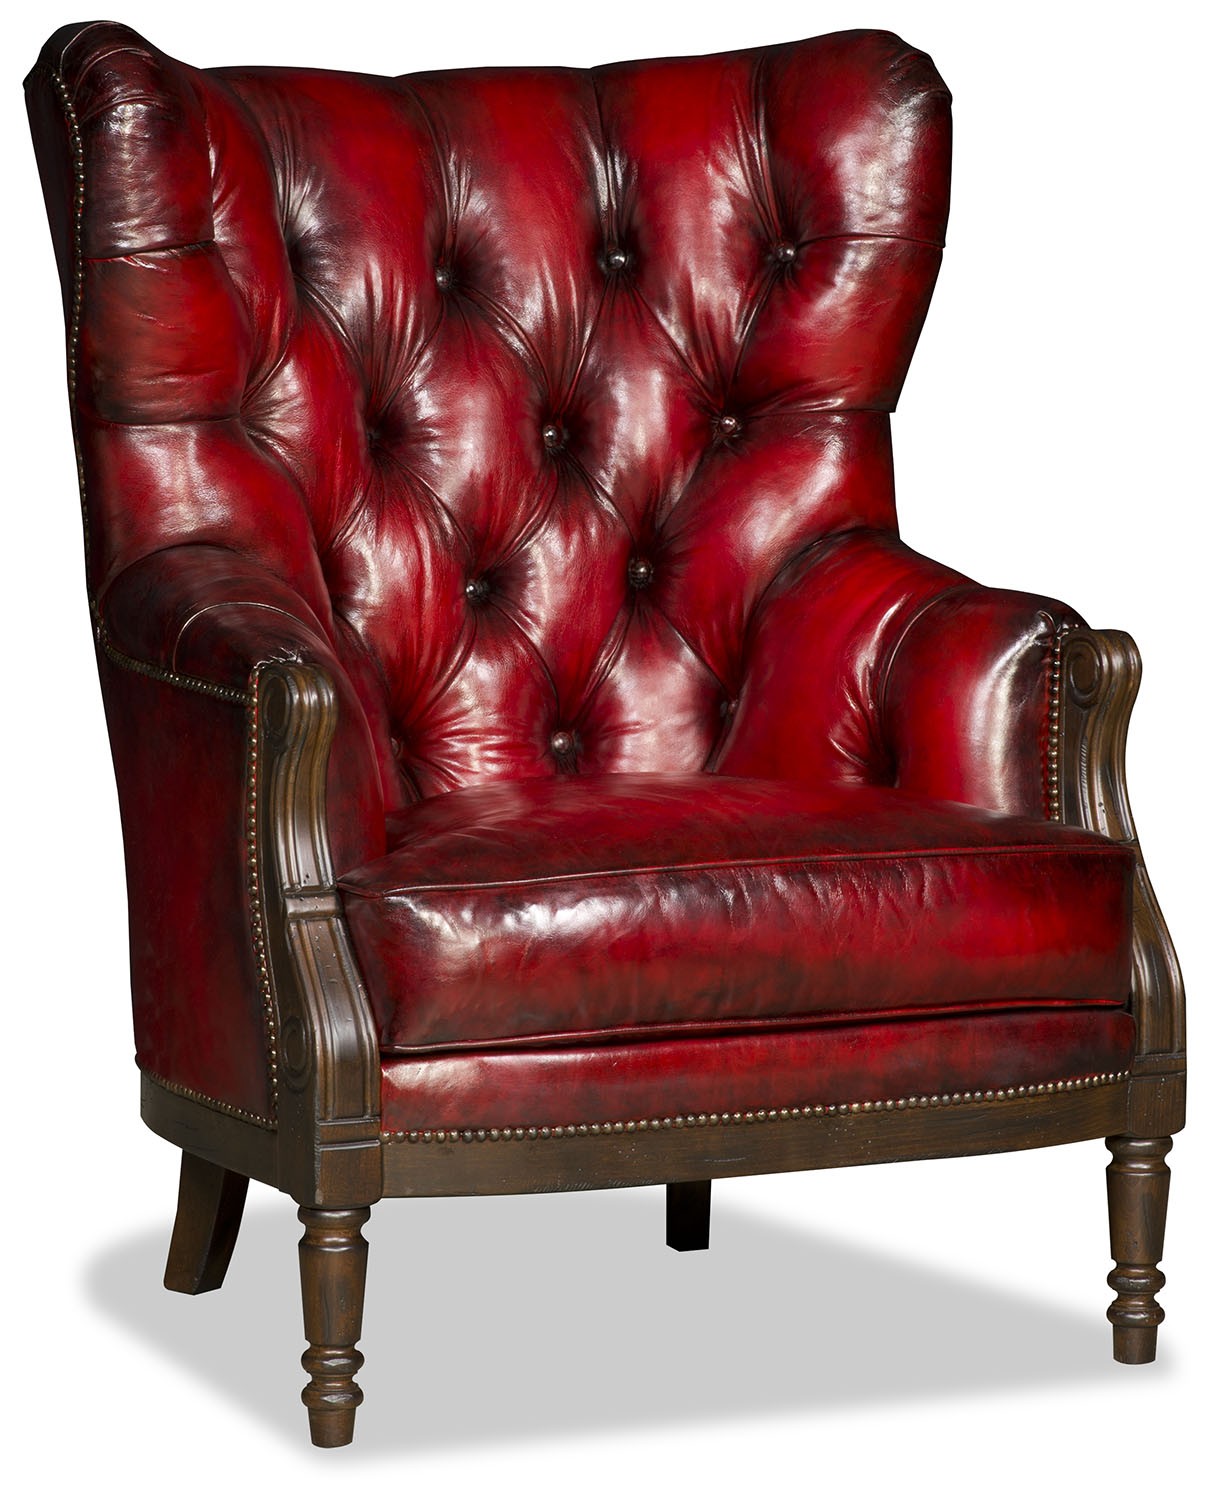 CHAIRS, Leather, Upholstered, Accent Formal Antique-Looking Red Arm Chair